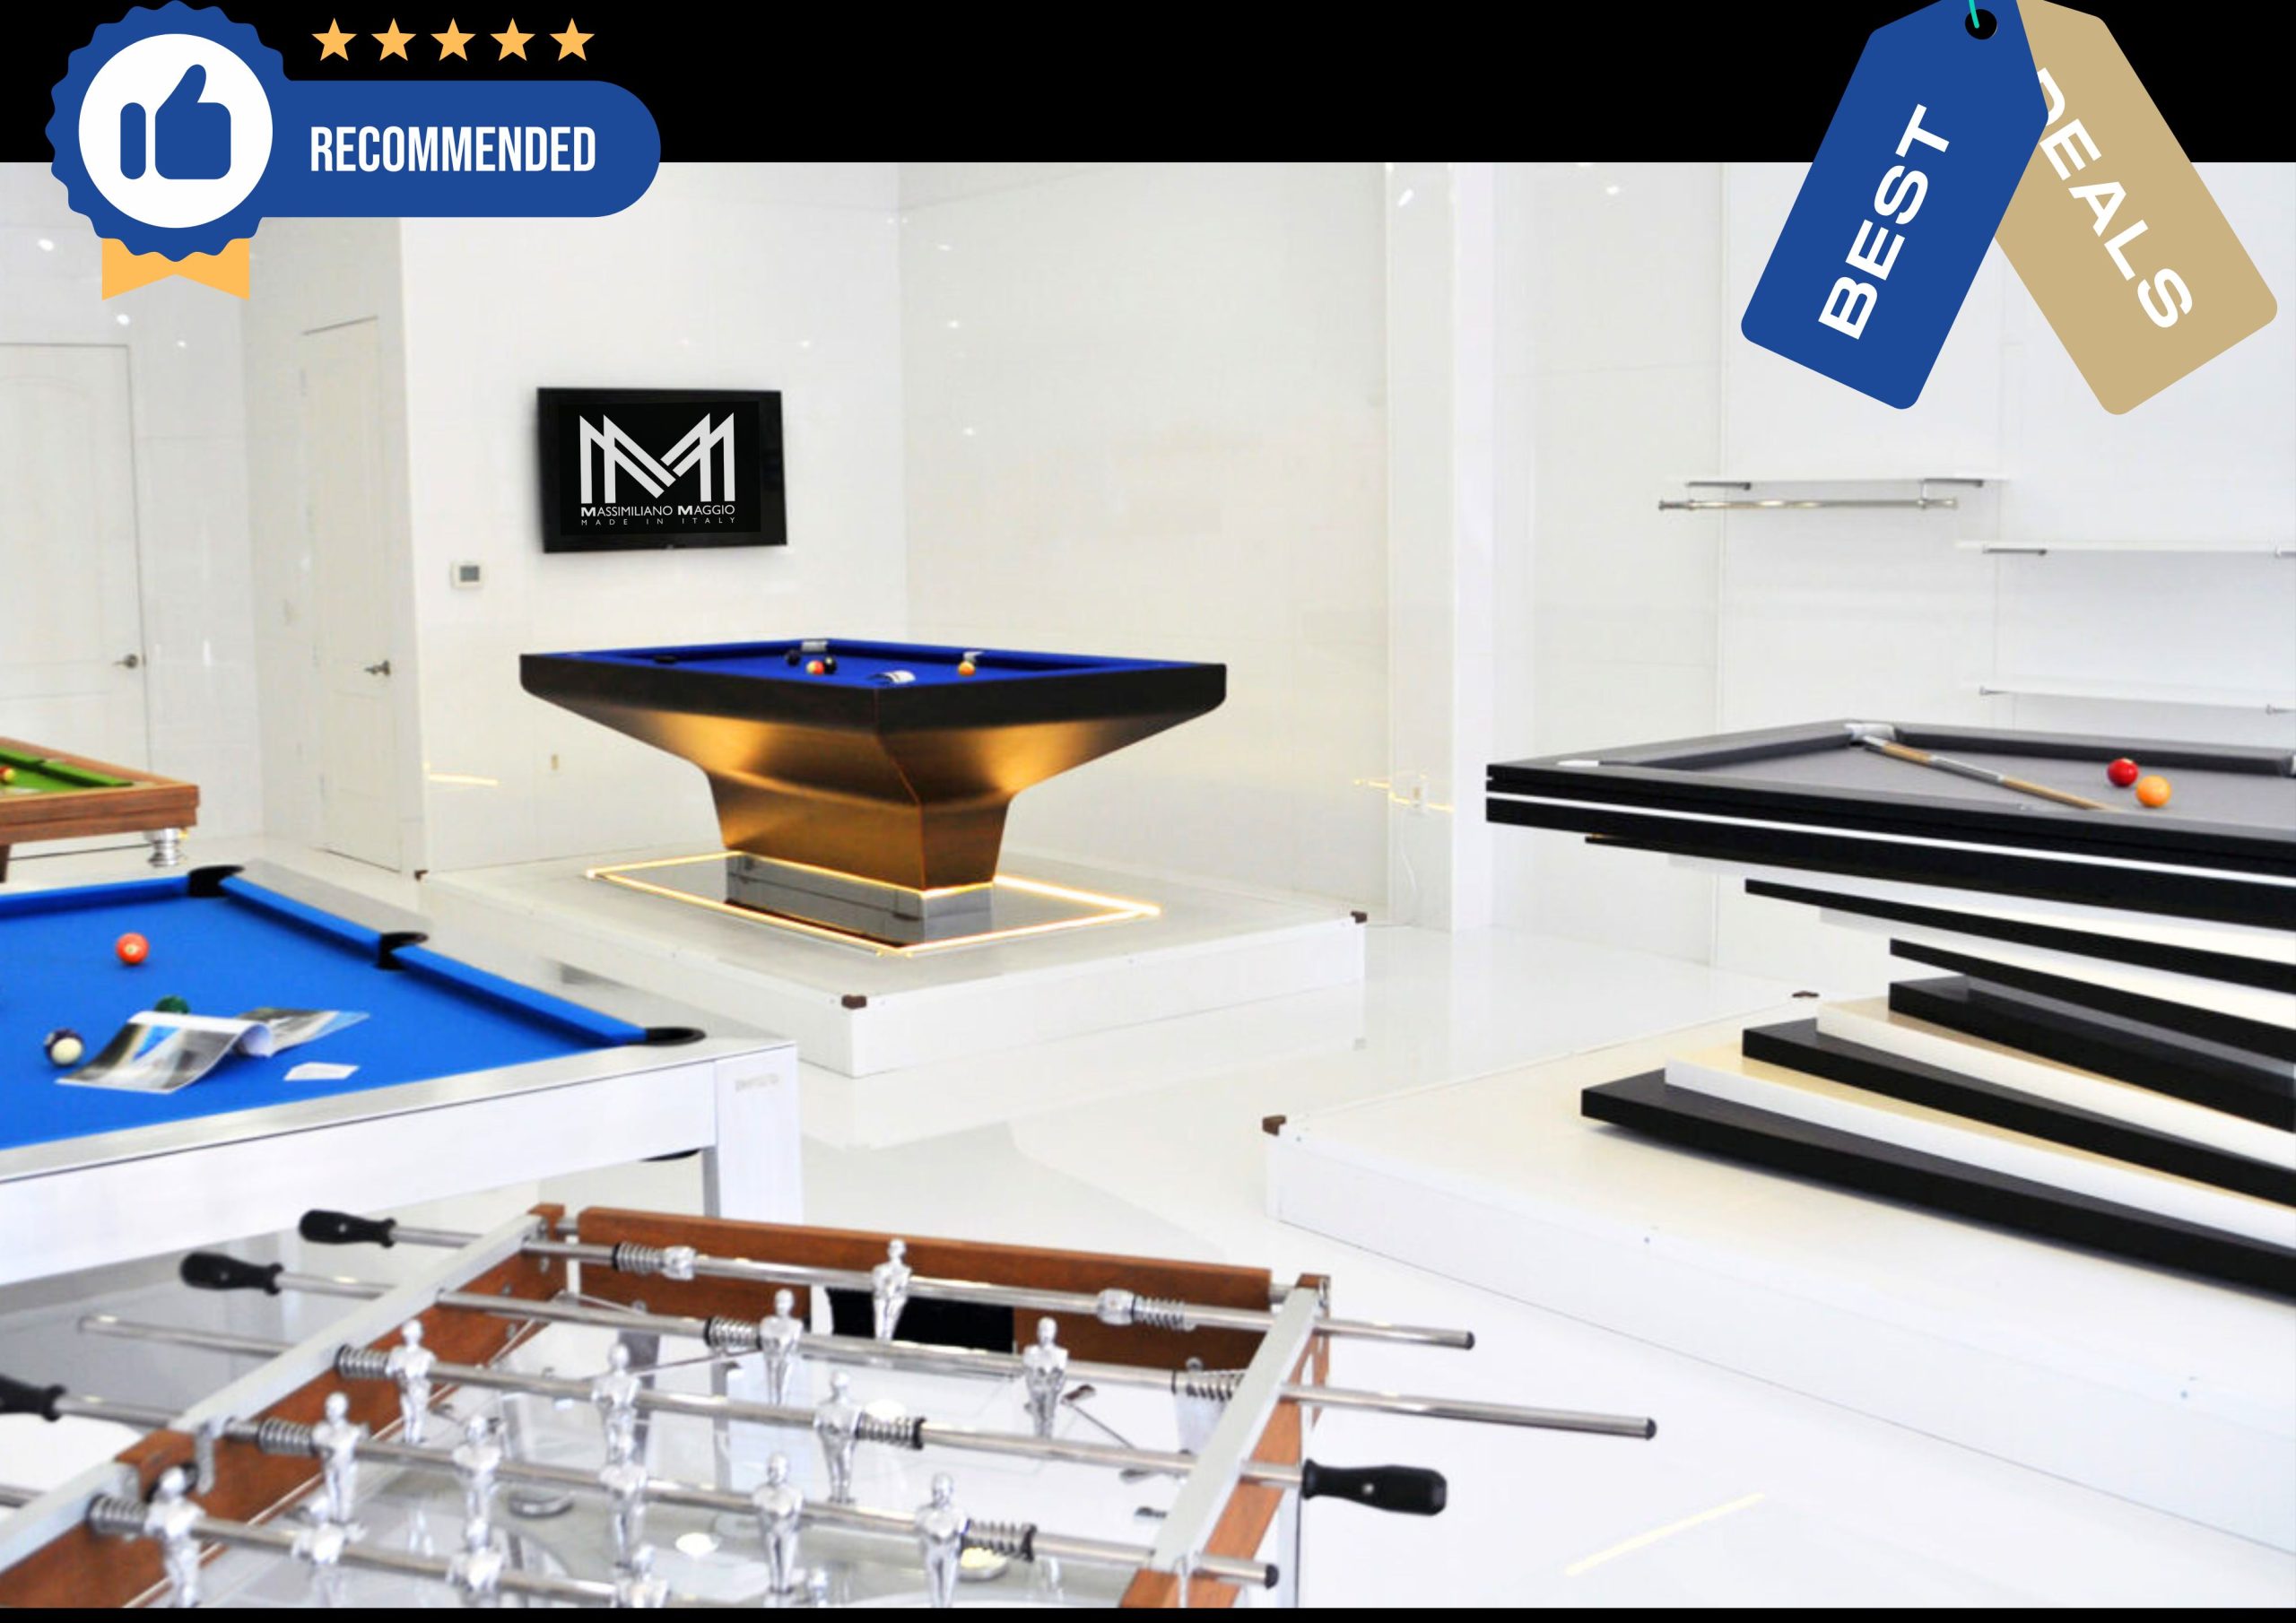 Massimiliano Maggio Luxury Pool Table Outlet